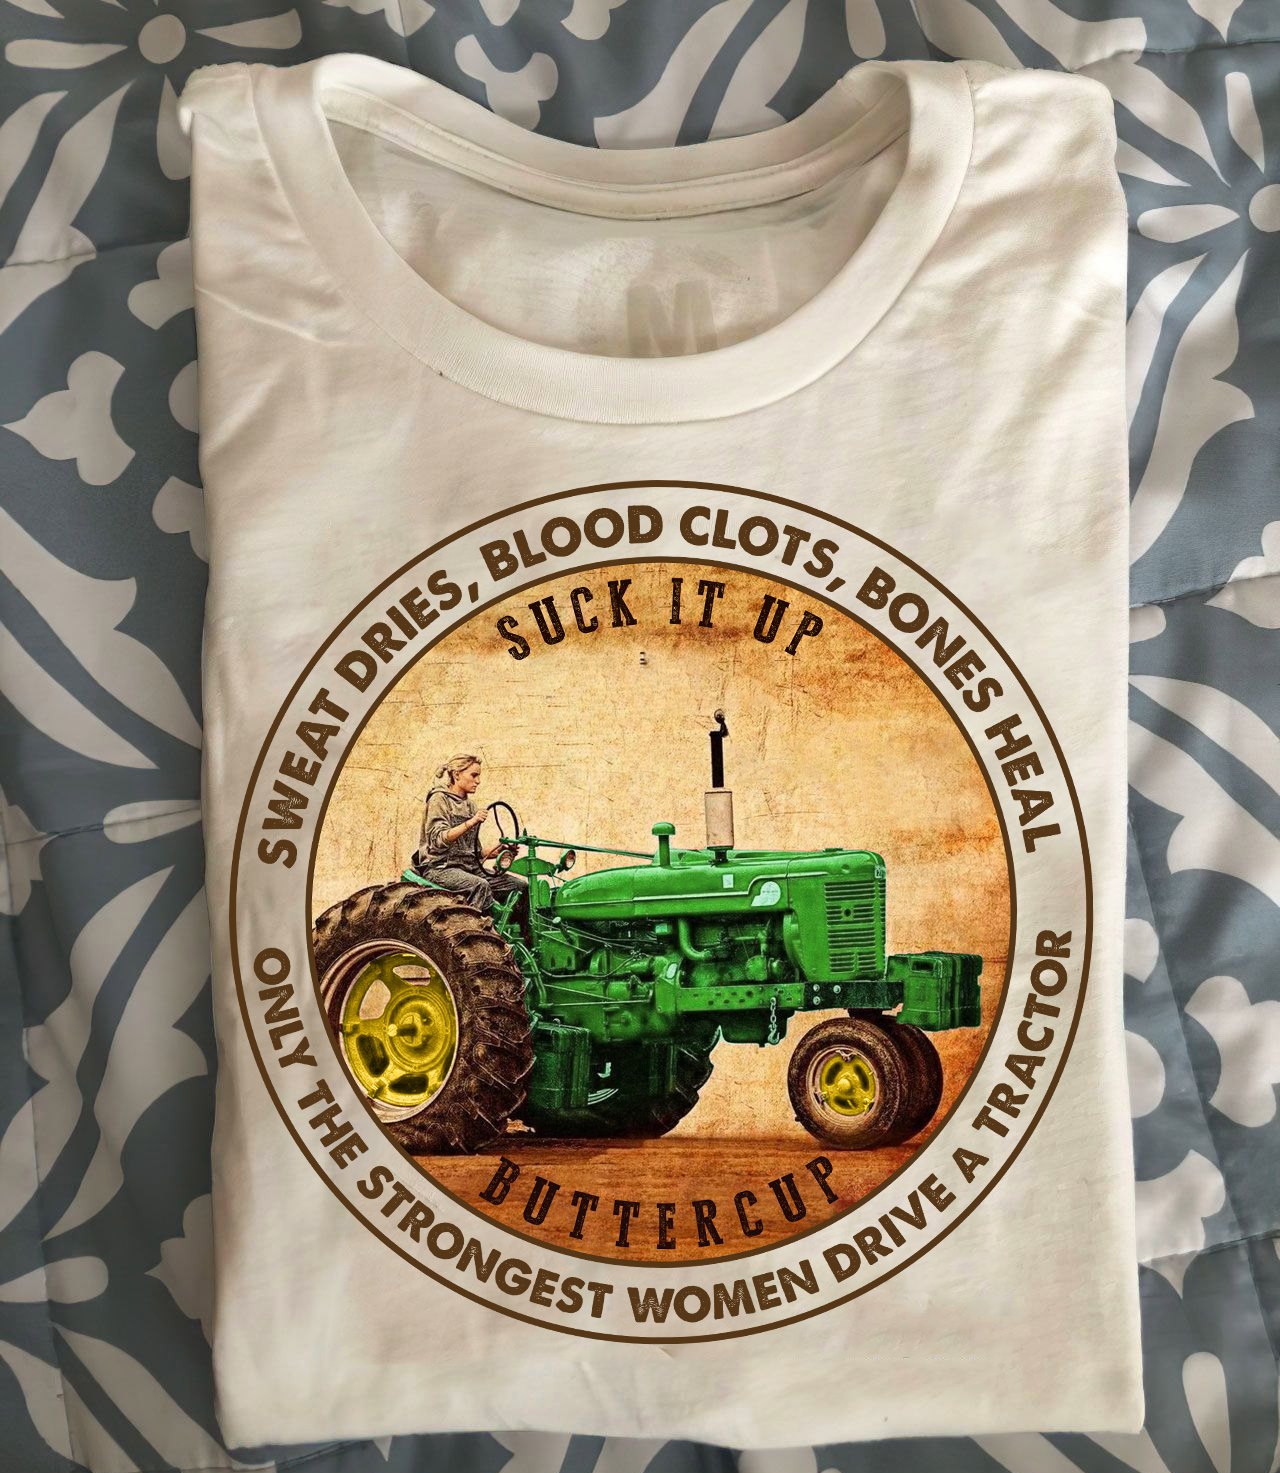 Sweat dries, Blood clots, Bones heal, Only the strongest women drive a tractor